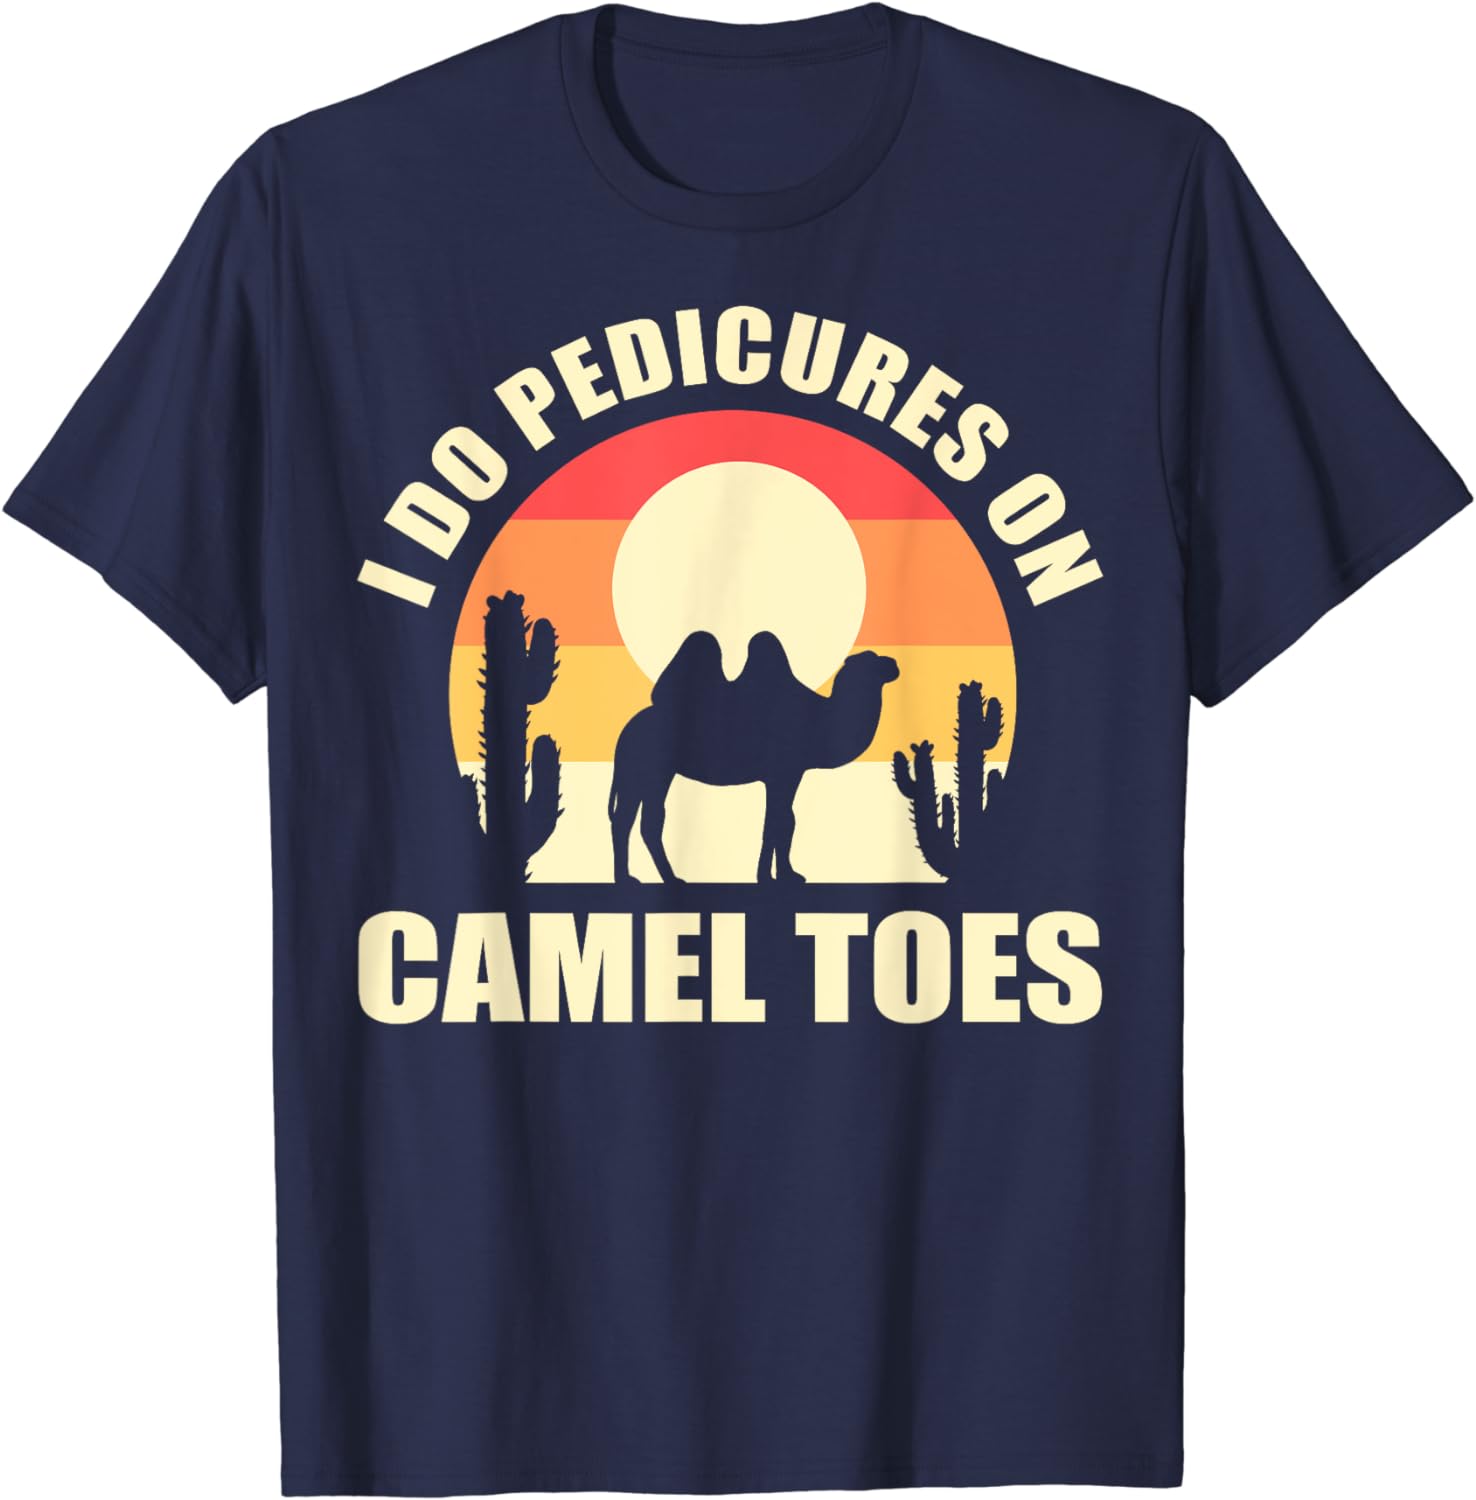 Stylish 'I Do Pedicures On Camel Toes' Shirt For Foot Care Professionals